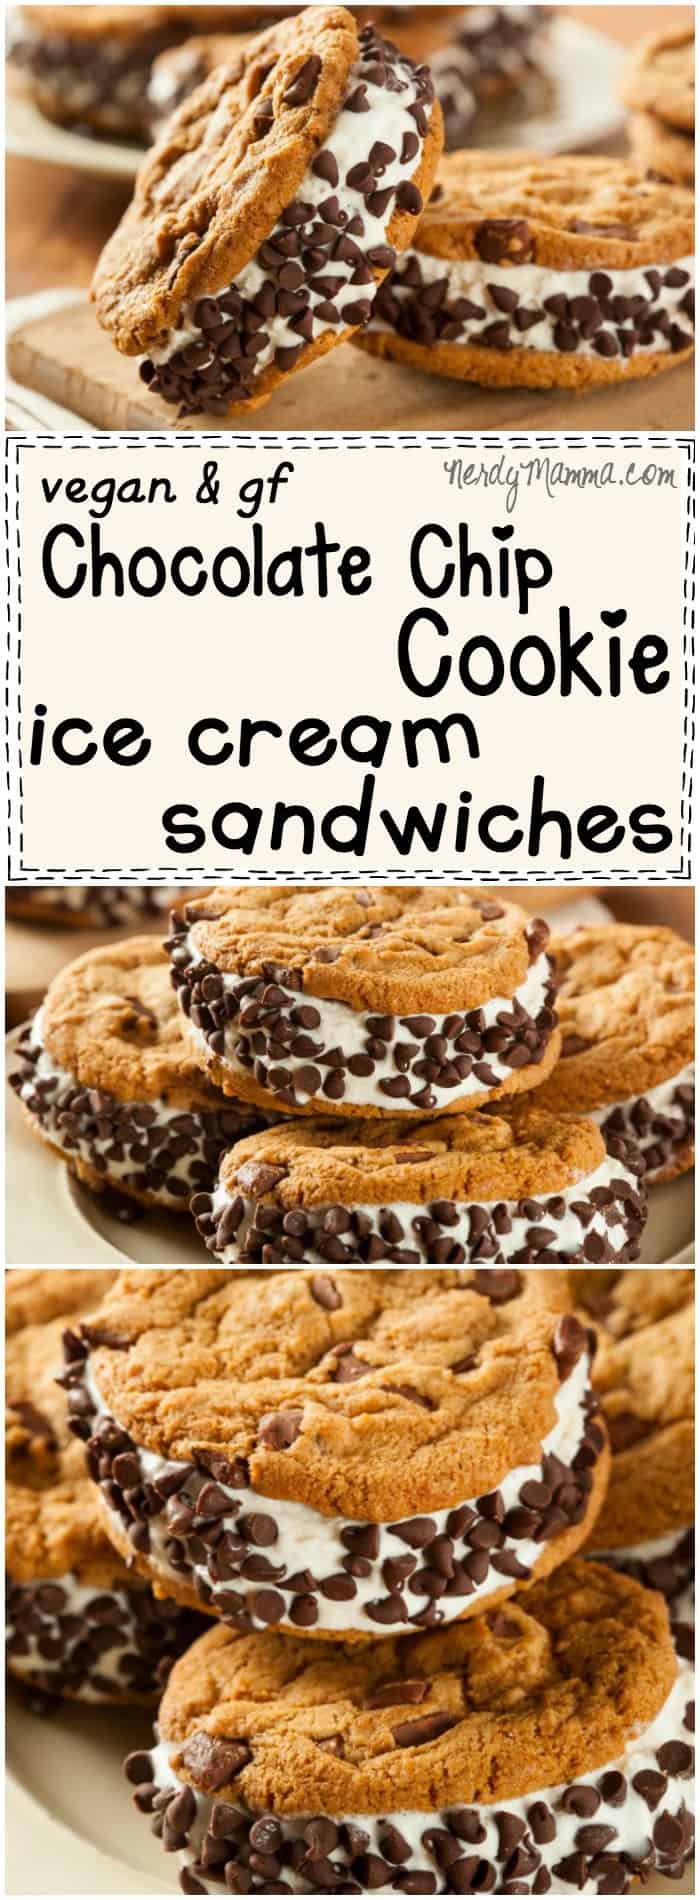 These Vegan and Gluten-Free Chocolate Chip Cookie Ice Cream Sandwiches are just so easy! I had no idea! I love this idea and will DEFINITELY be making a batch (or two) this summer for the kids!